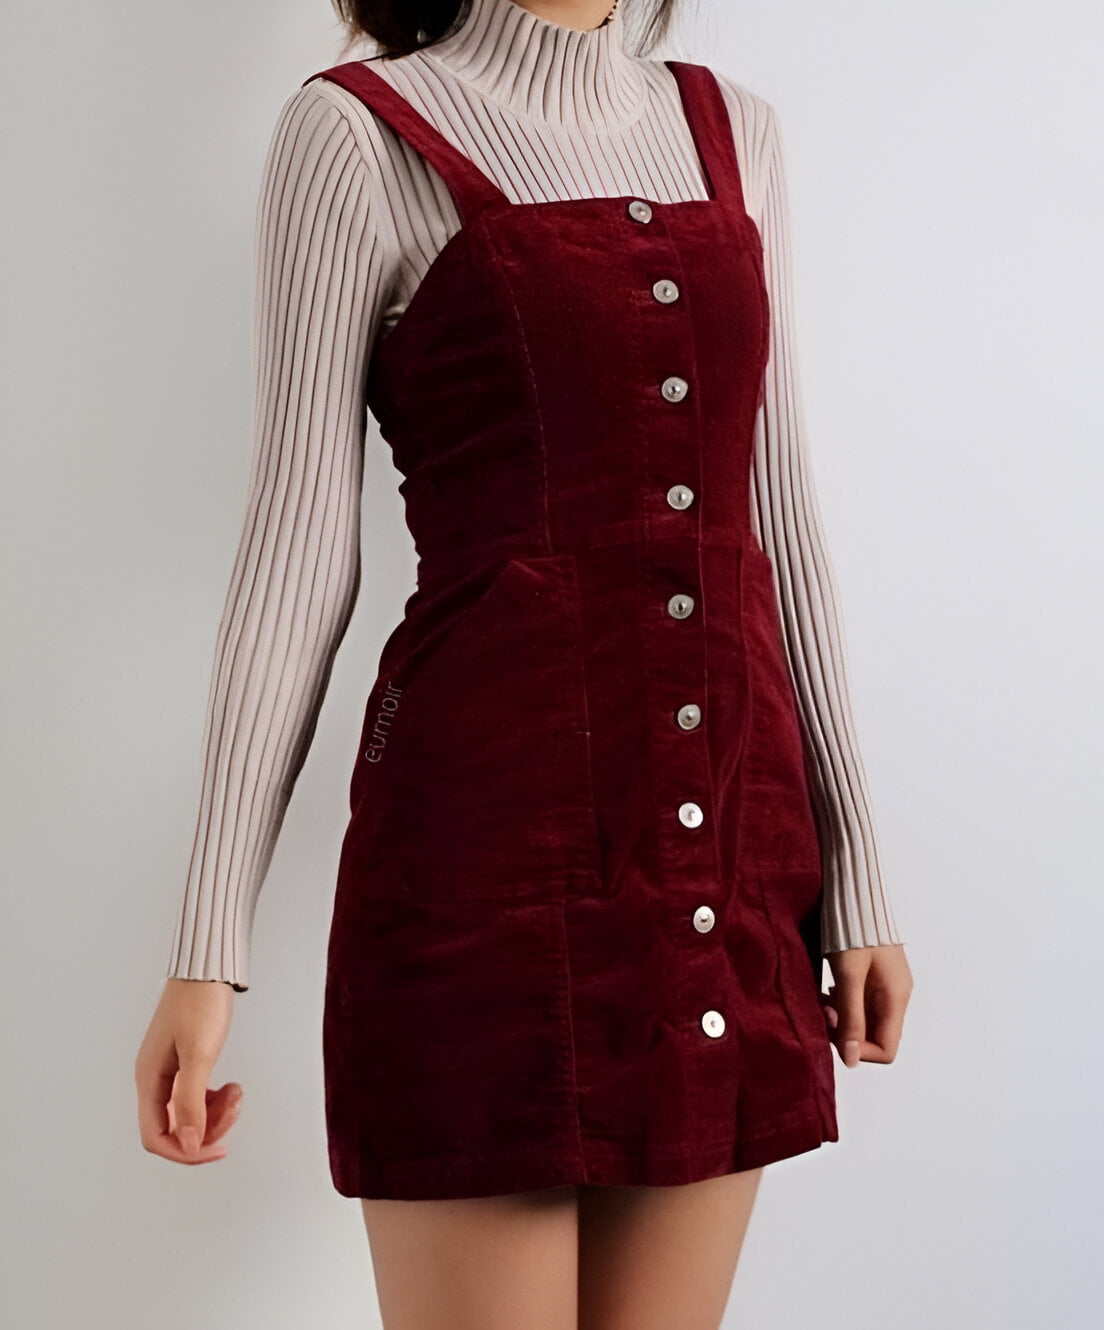 Red Overall Dress And Sweater